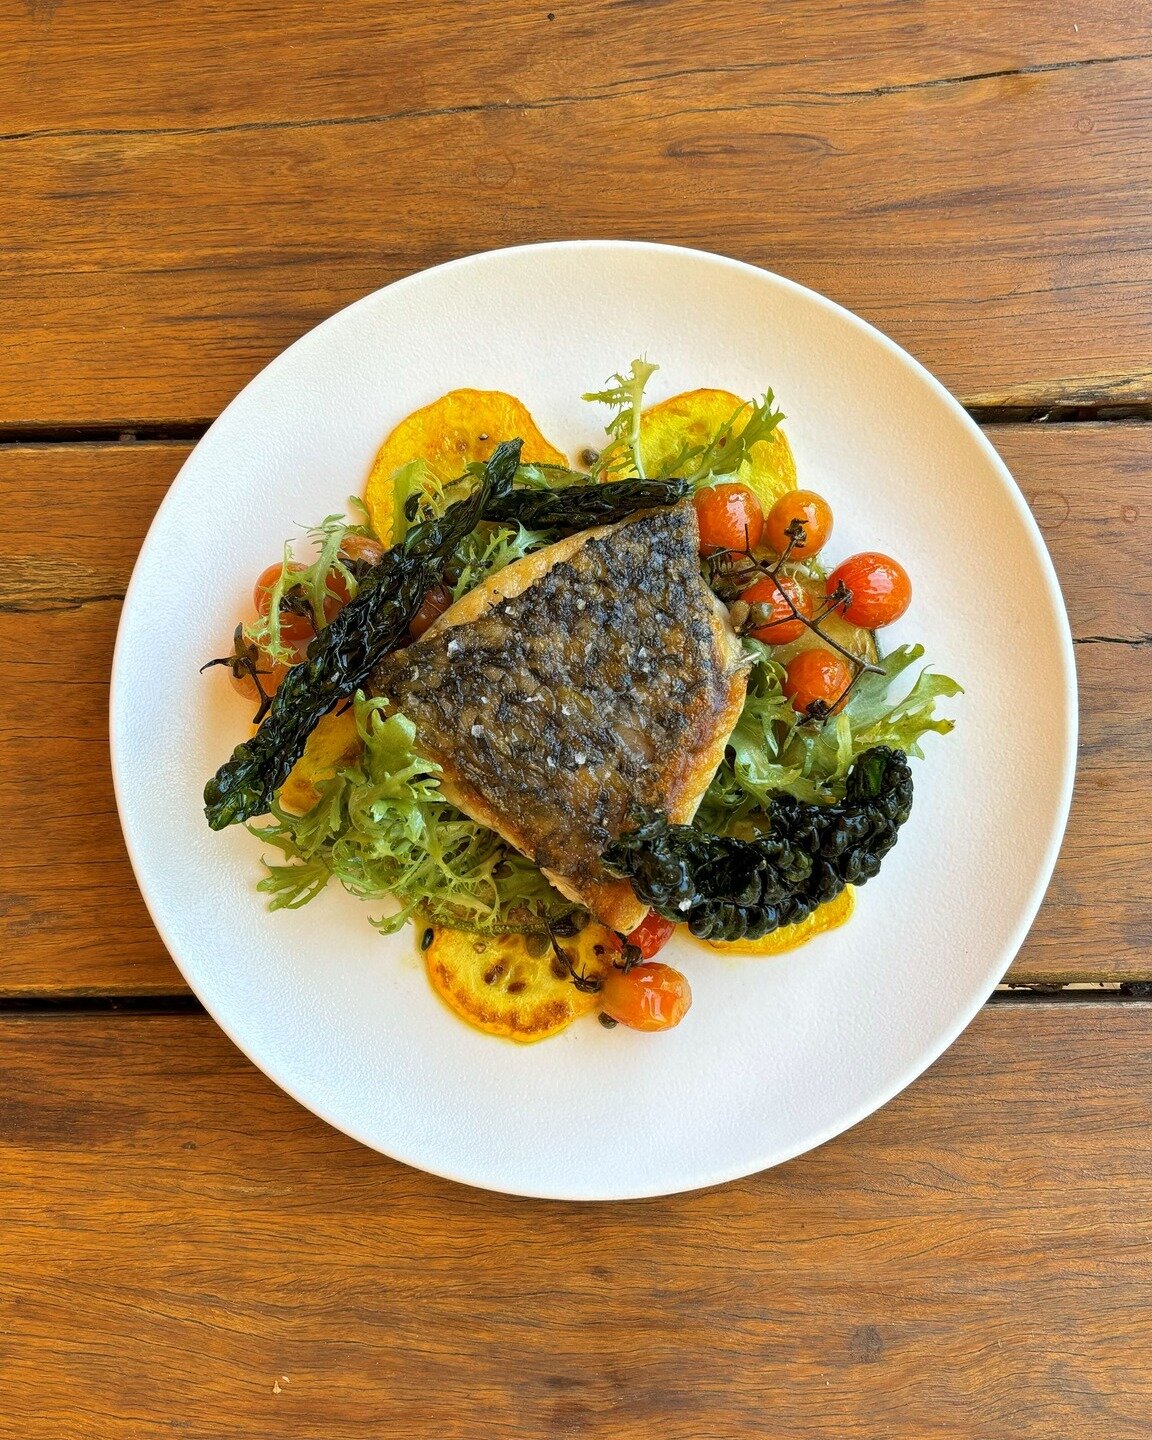 Don't miss this weekend's special! Barramundi, summer squash, confit cherry tomatoes. Until sold out.